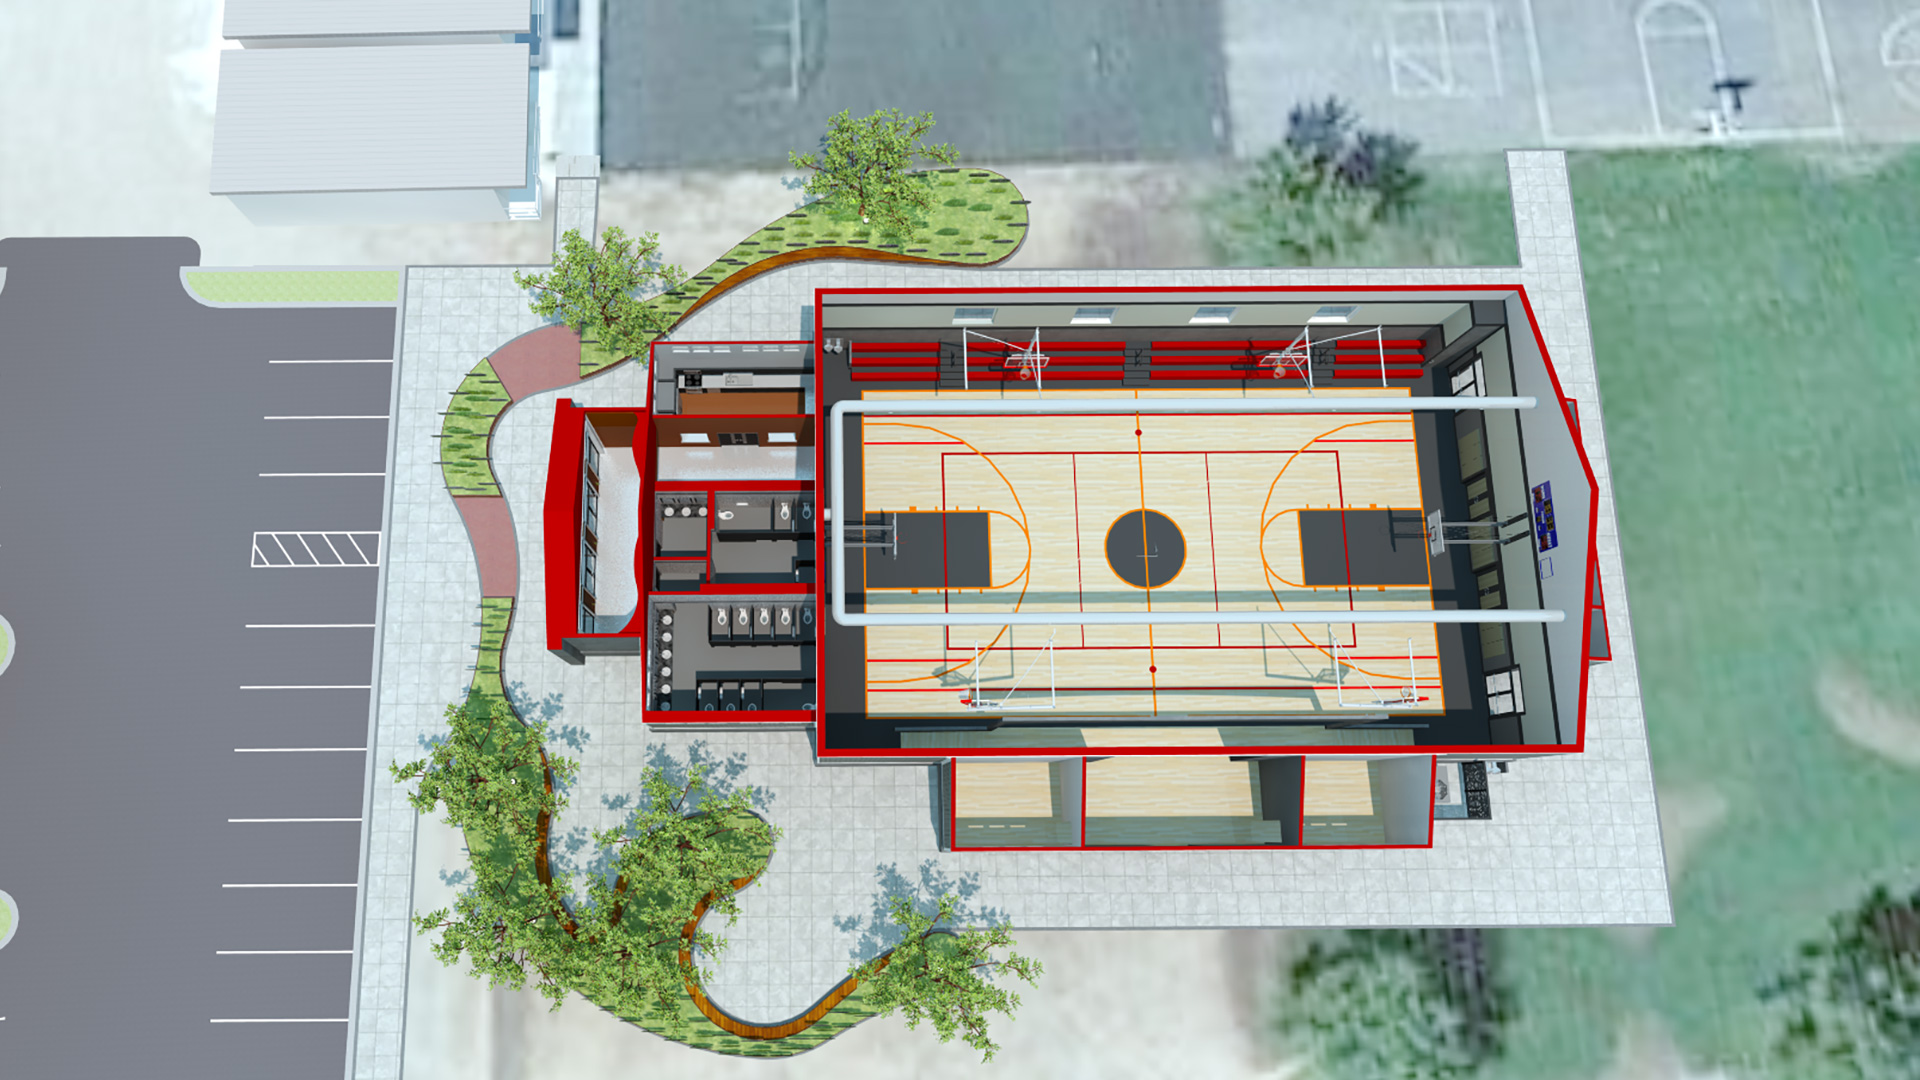 Rendering of gym floor plan, showing the artsy landscaping concept that curved around the entrance.